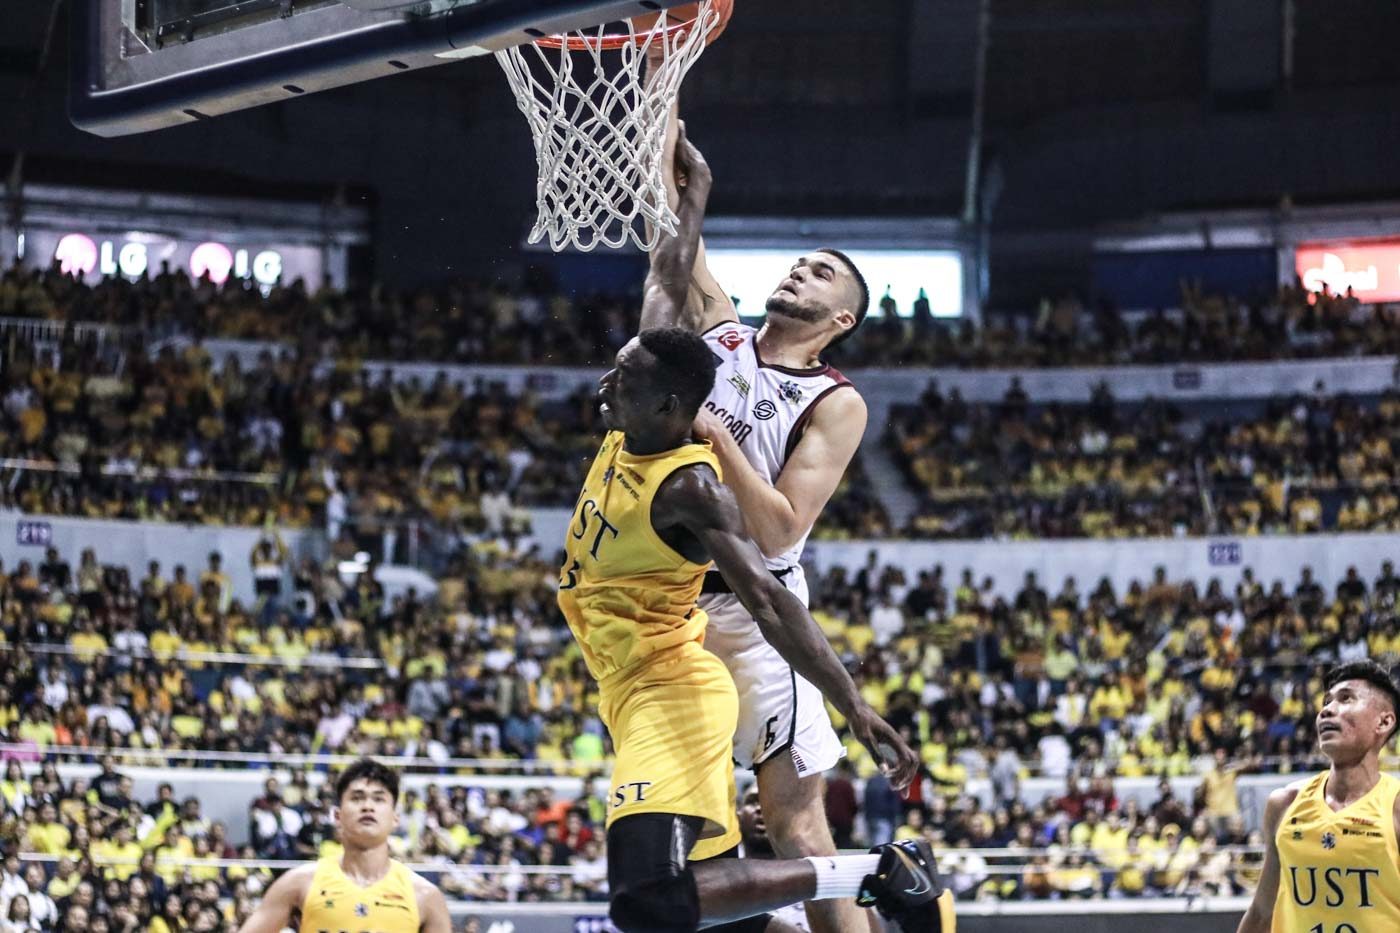 BIG NUMBERS. League MVP Soulemane Chabi Yo powers his way to an all-around effort of 17 points, 15 boards, 4 steals, and 2 assists as UP star Kobe Paras winds up with just 9 points. Photo by Michael Gatpandan/Rappler  